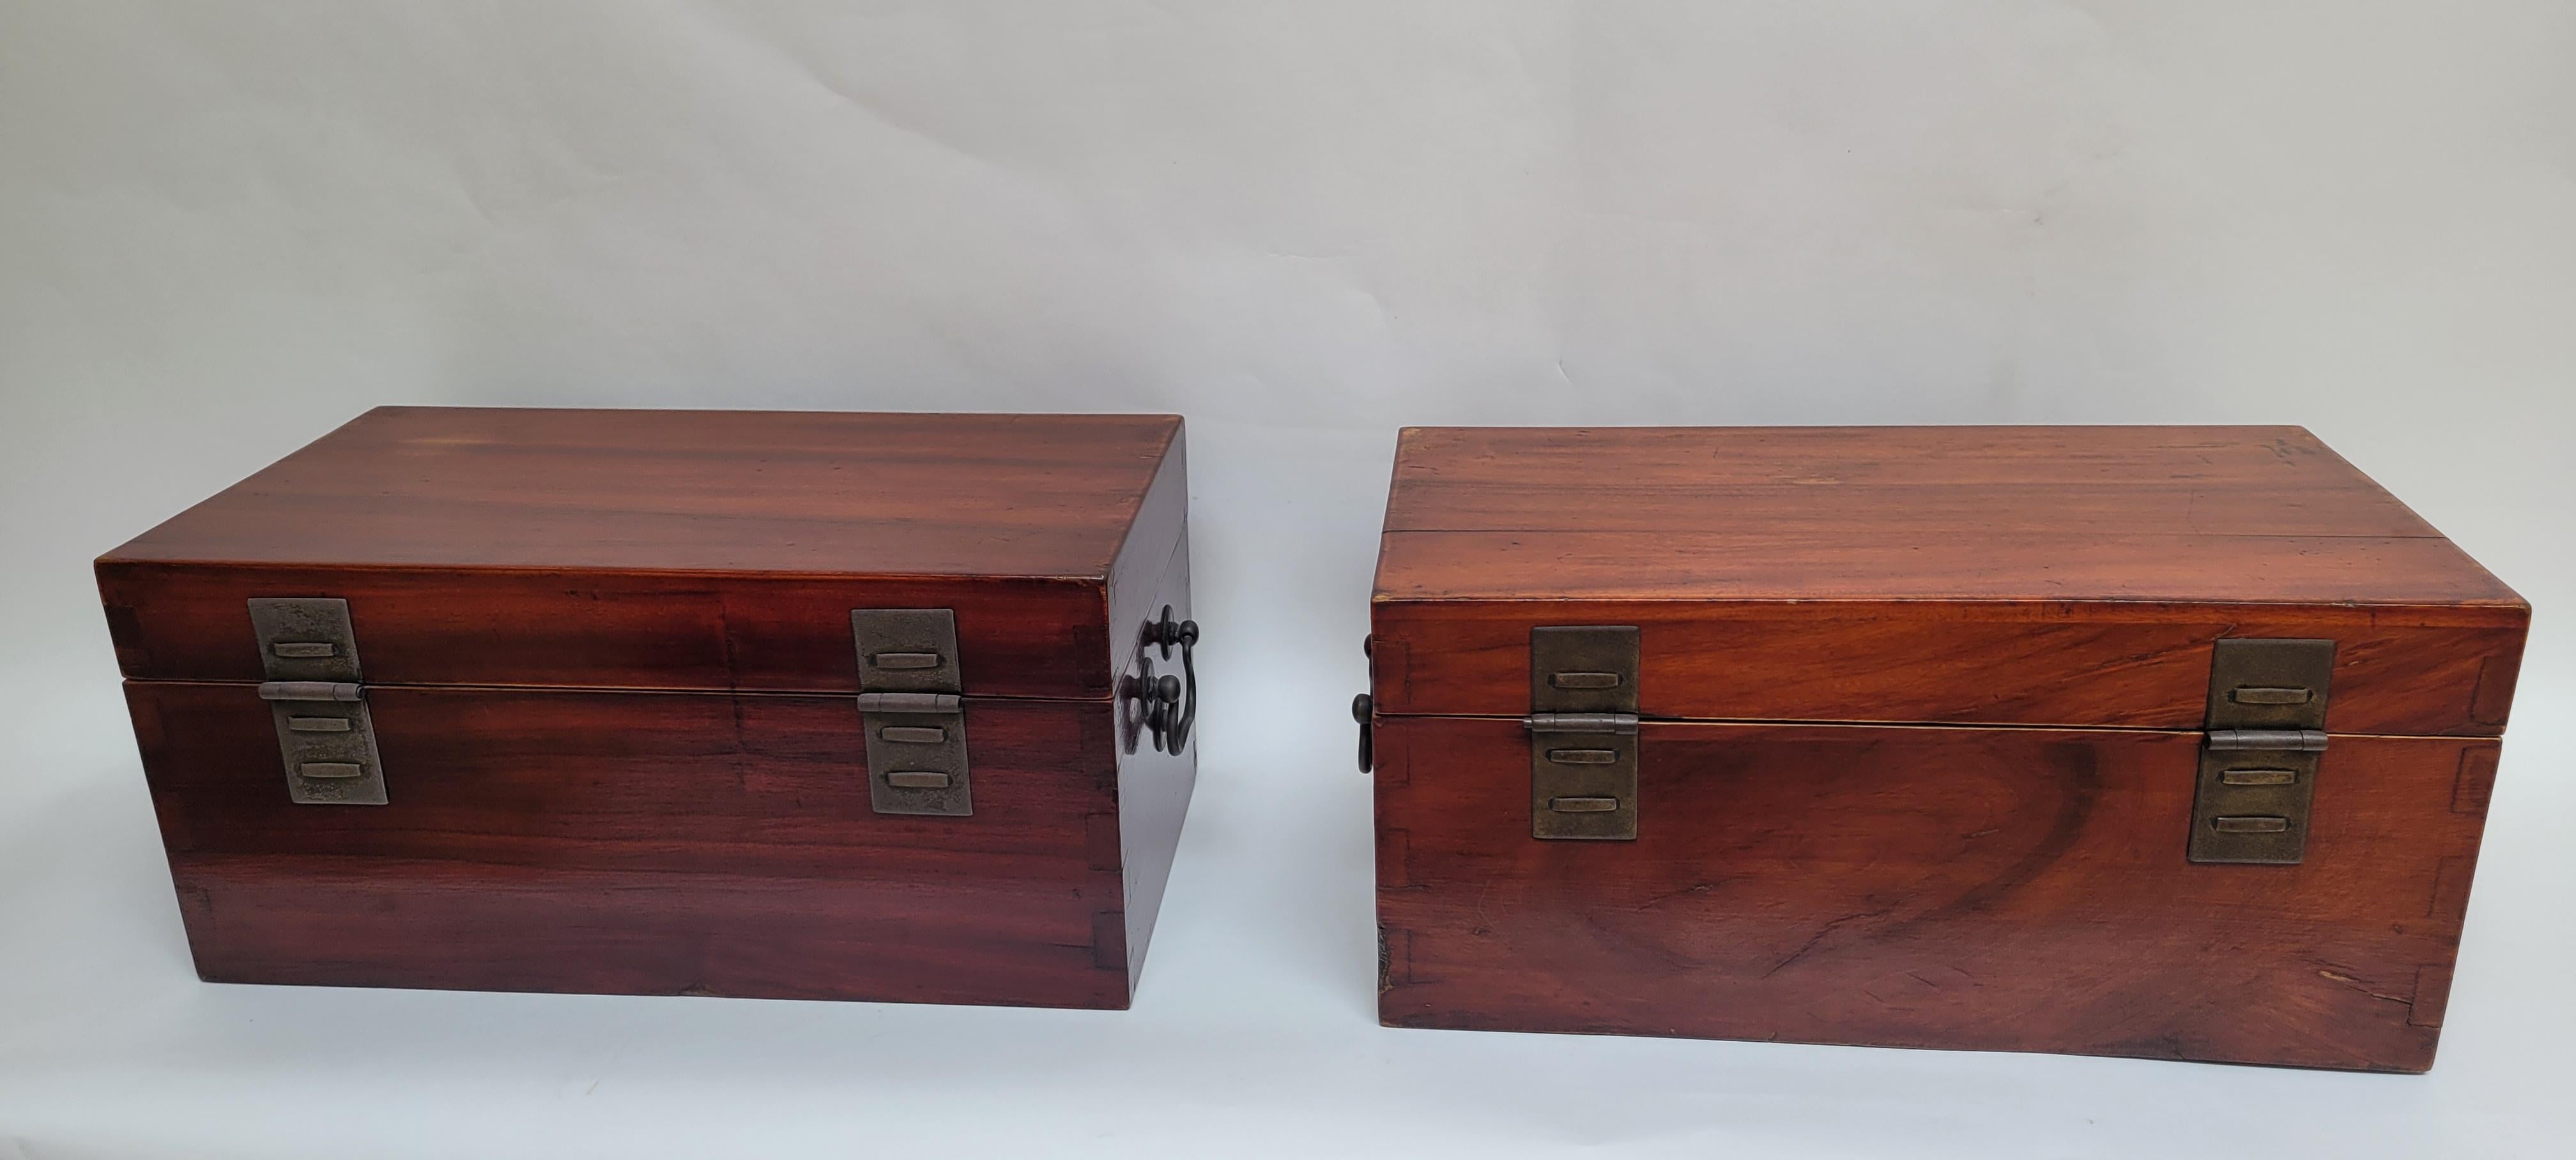 19th Century Pair of Camphor Boxes For Sale 4